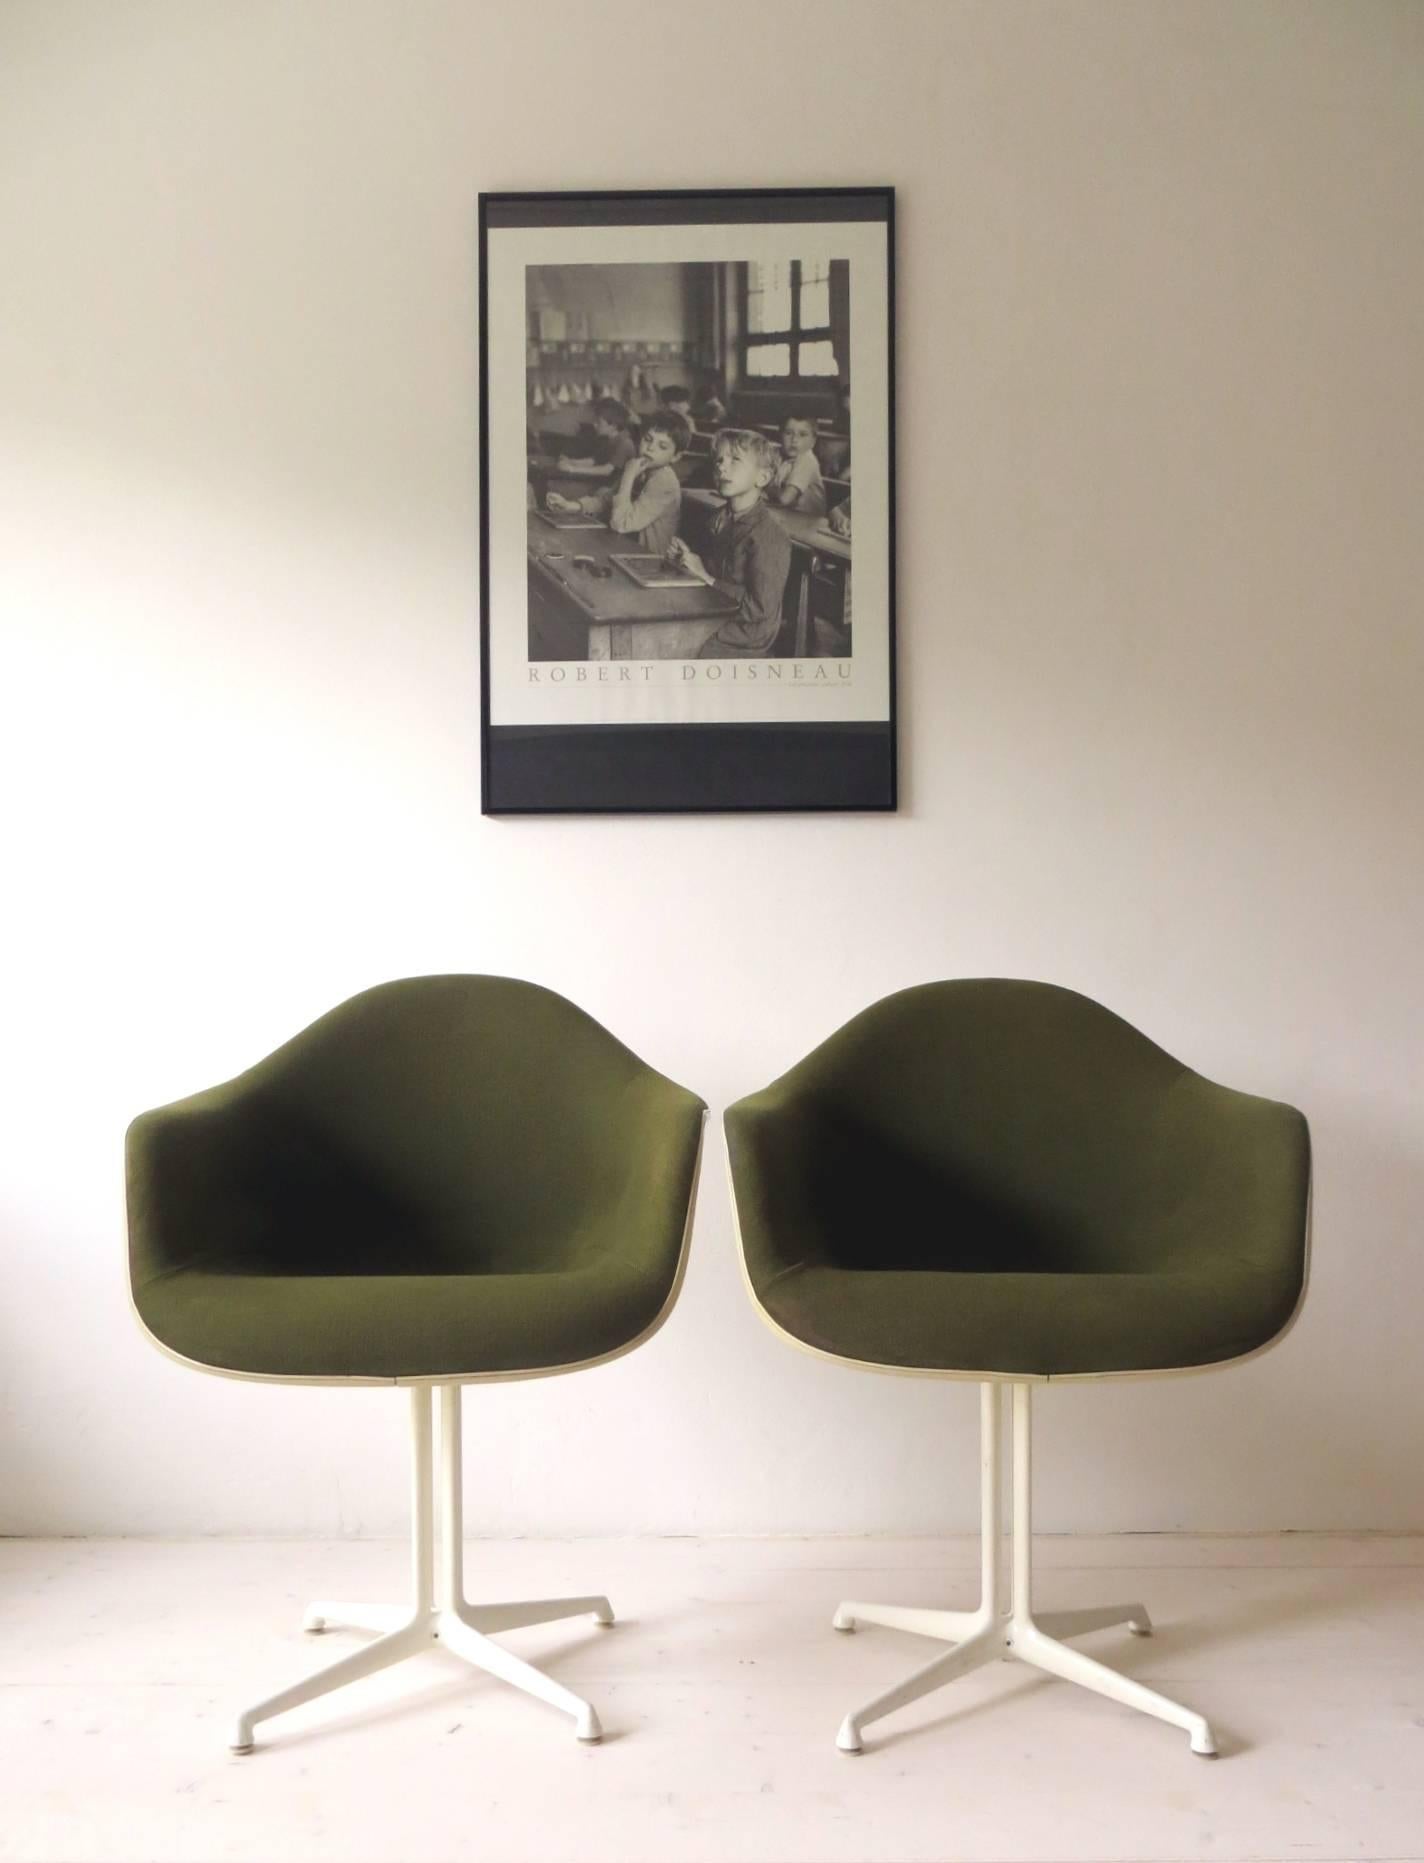 Original early and rare 1960s Herman Miller armchairs with La Fonda Leg - aluminum base with four parallel strings - which designed by Girard and Charles Eames in 1961 for the legendary New York restaurant La Fonda de Sol. The shell is made of